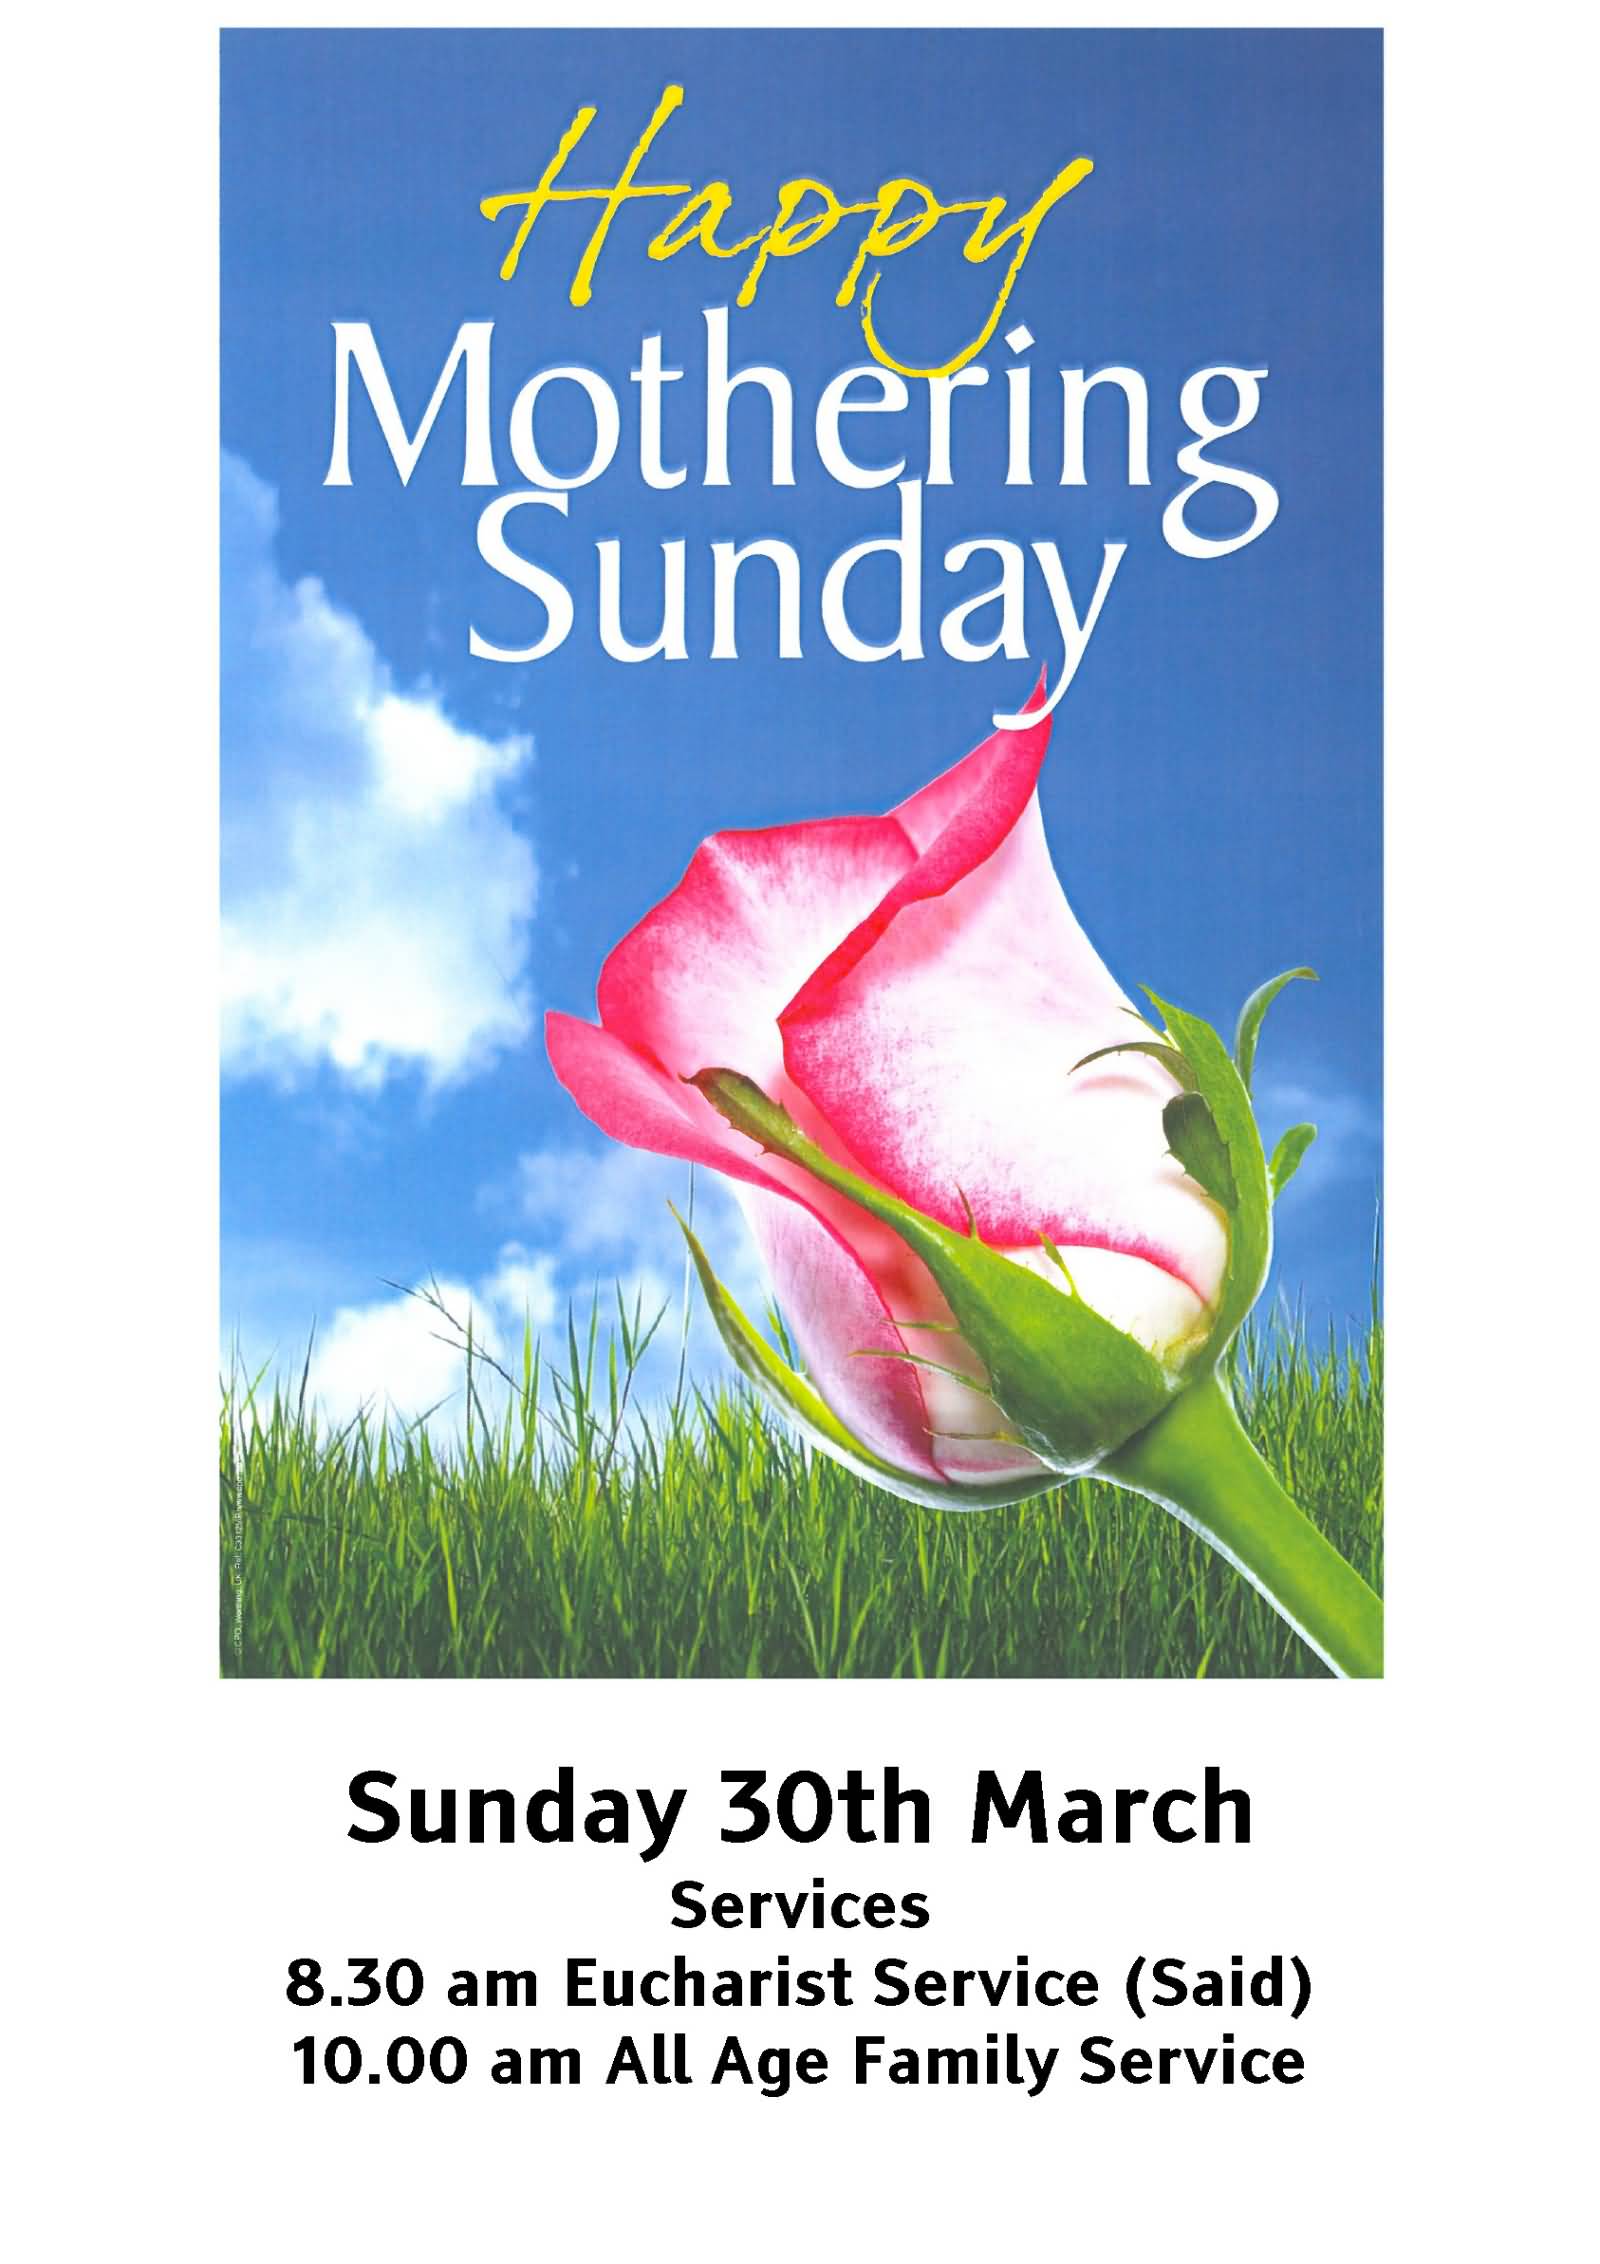 Happy Mothering Sunday Services